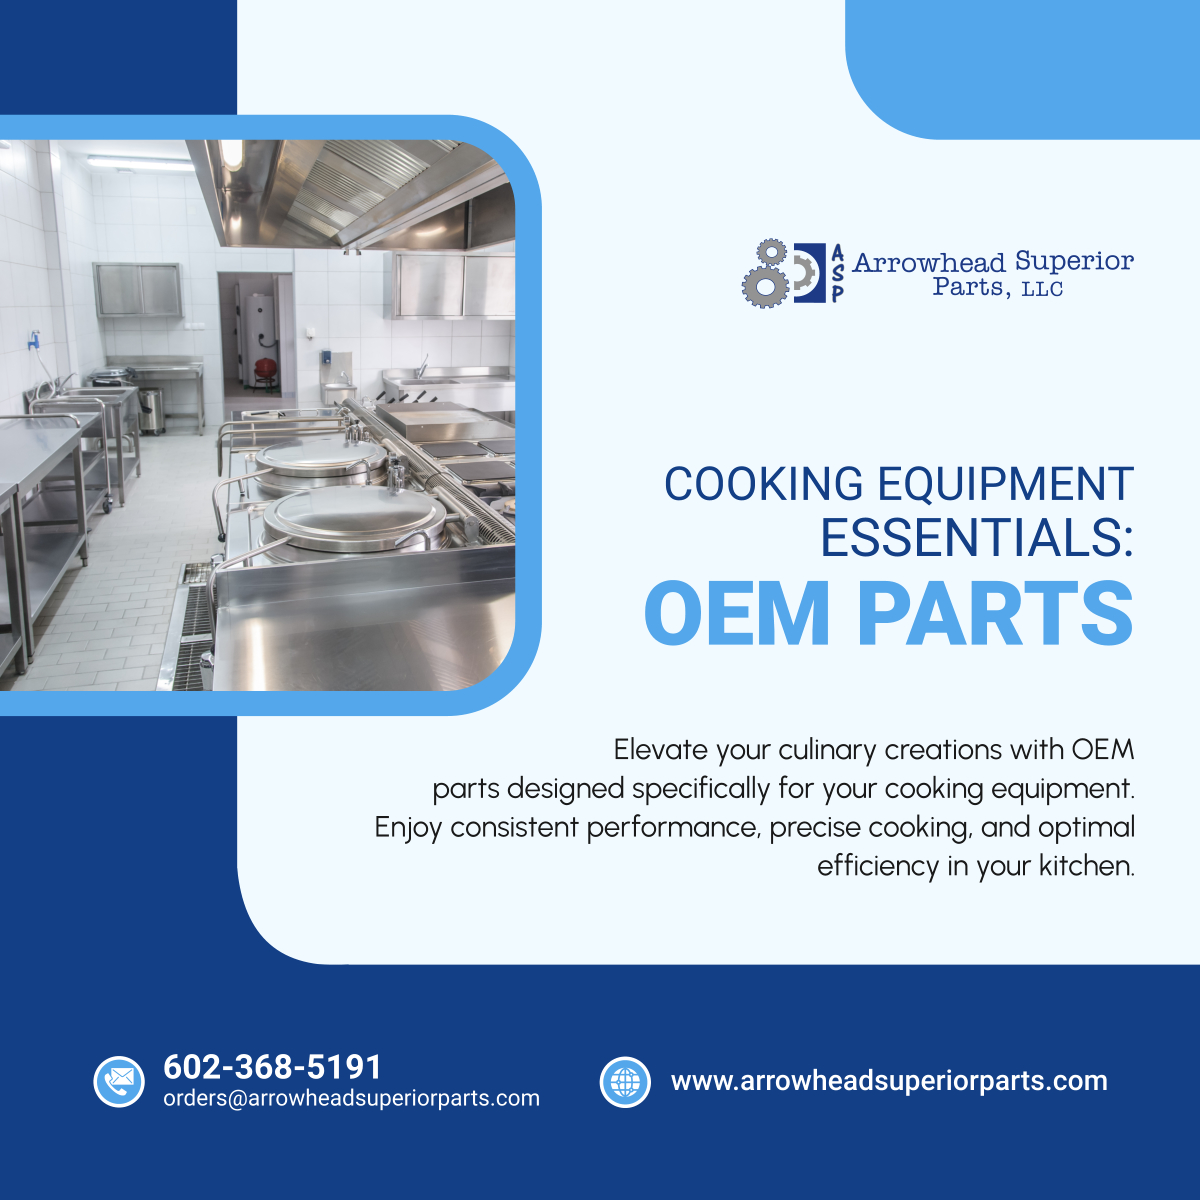 Enhance your cooking experience with OEM parts tailored to your equipment's needs. Discover the difference they can make in your kitchen's performance. 

#PeoriaAZ #OEMPartsProvider #CookingEquipment #CommercialKitchen #OEMParts #KitchenPerformance #KitchenUpgrades #QualityParts